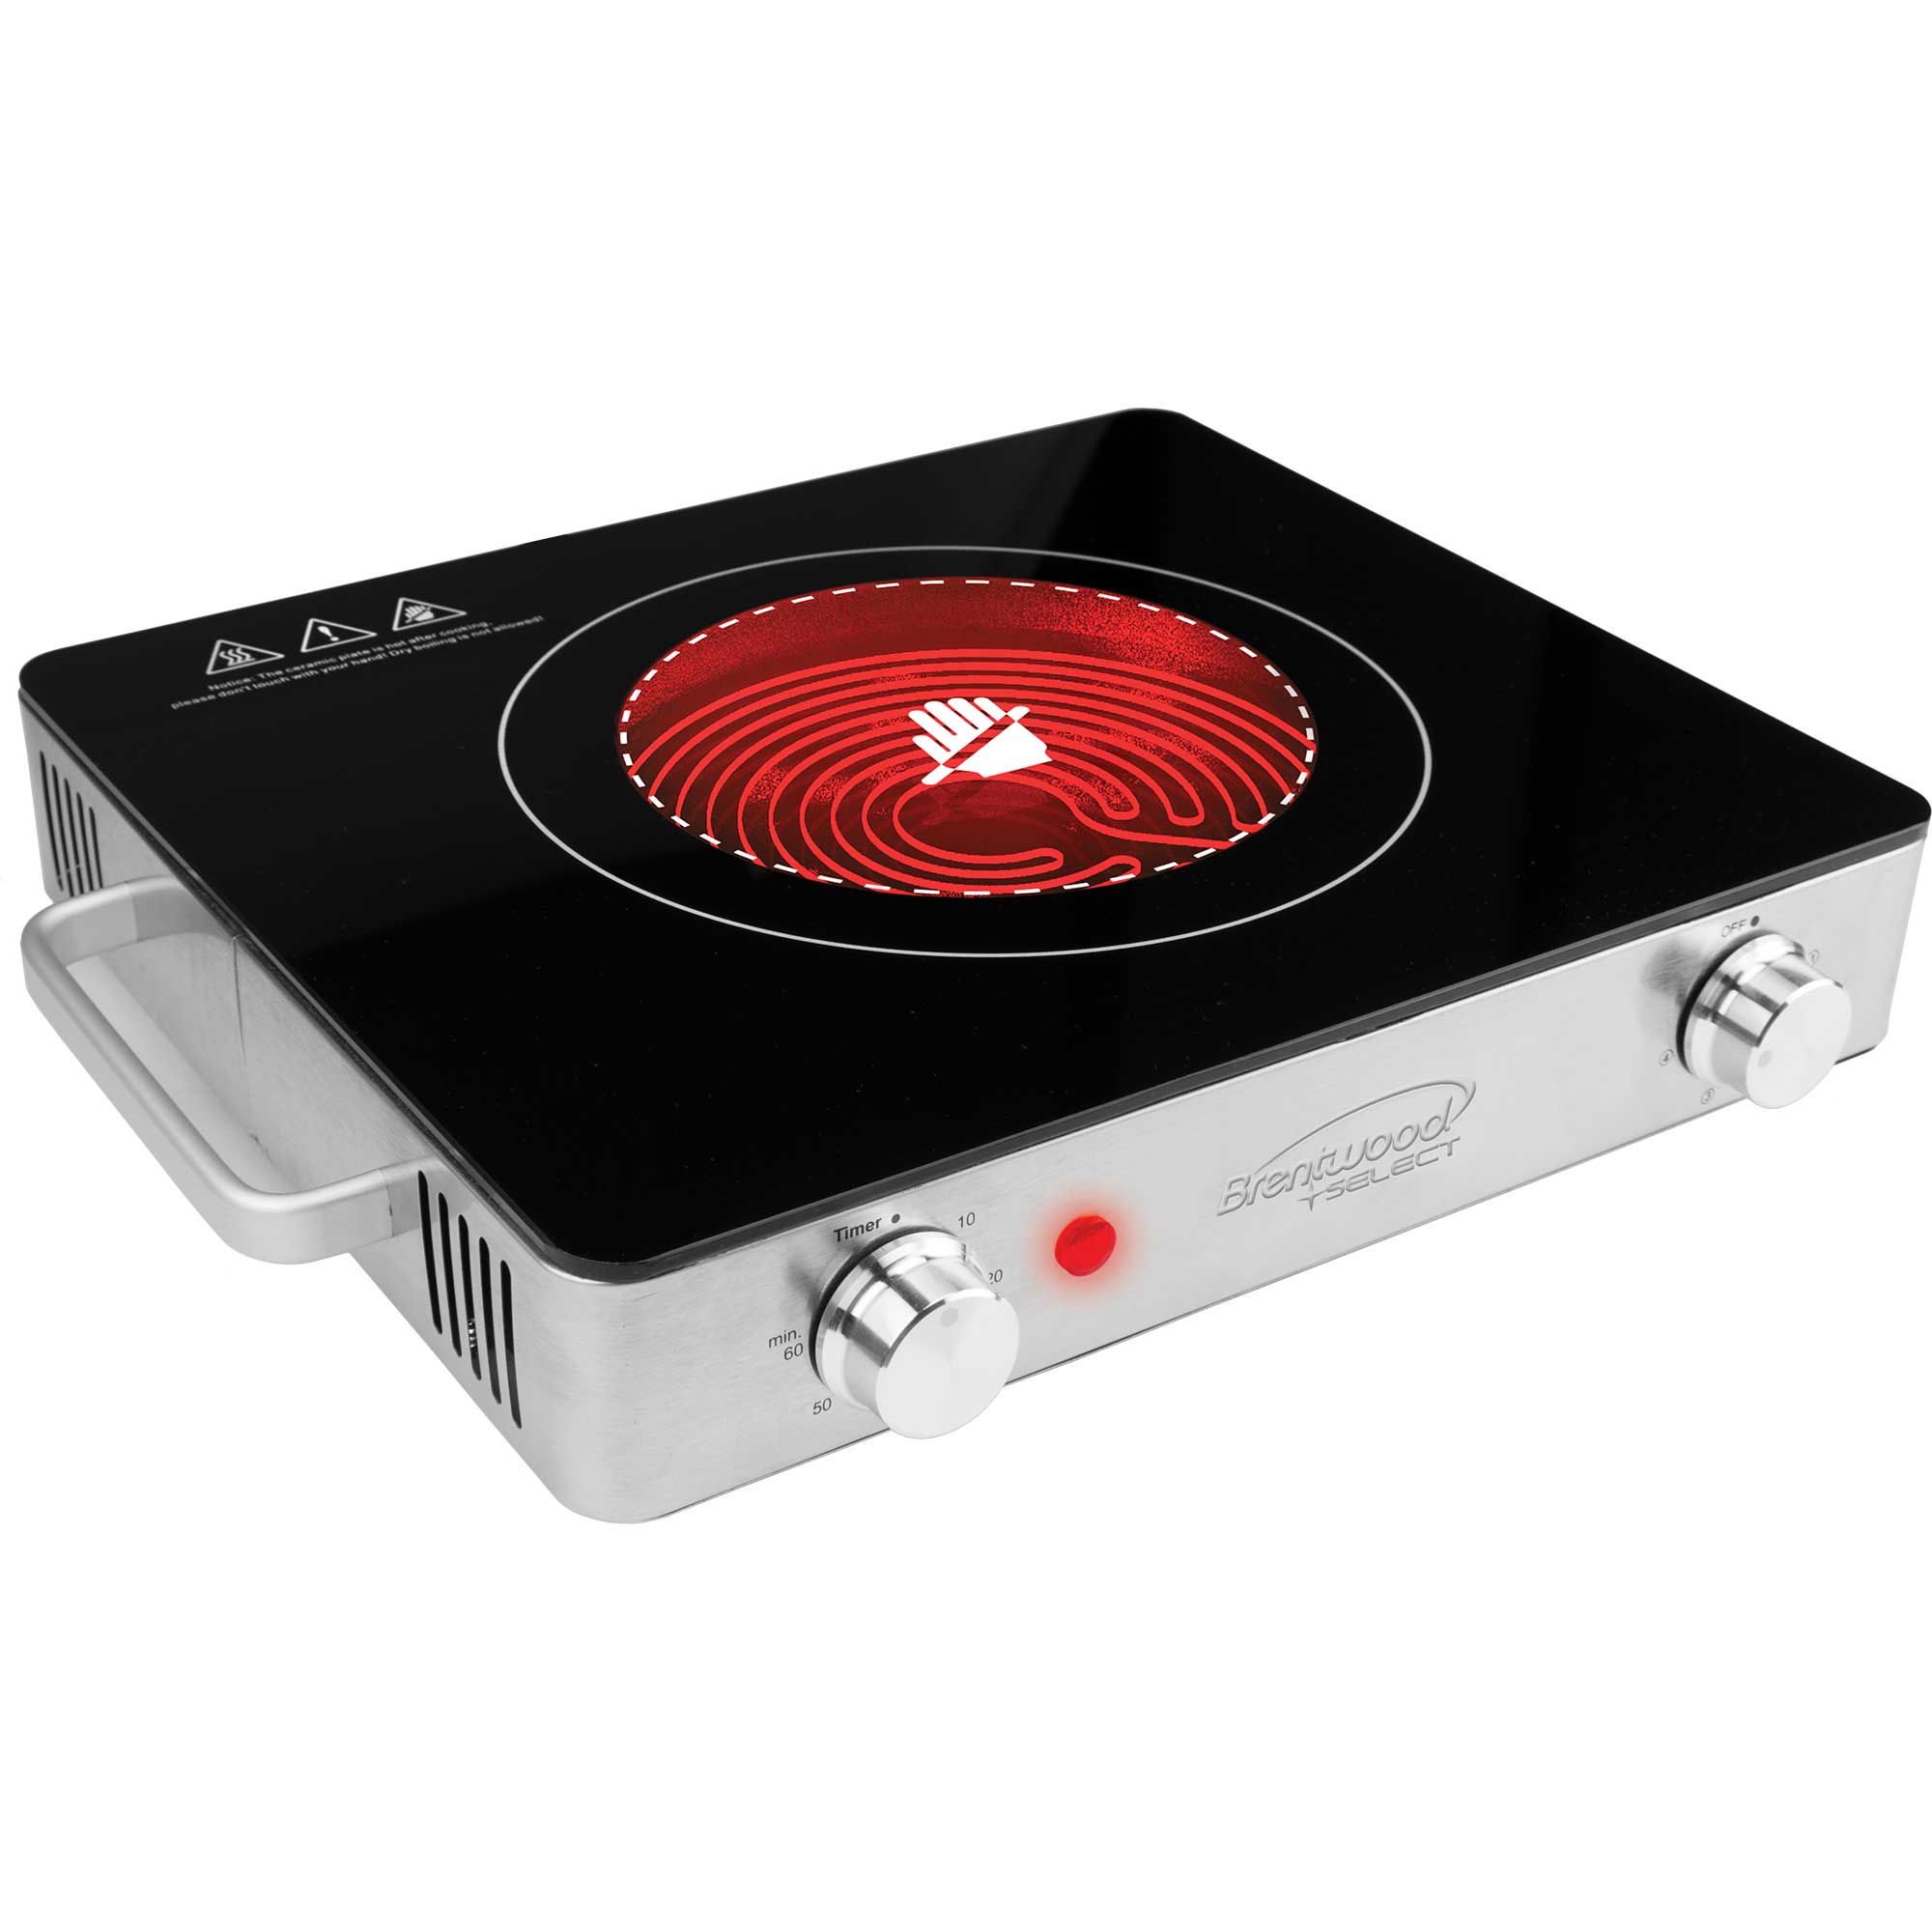 Brentwood Select TS-381 1200w Single Infrared Electric Countertop Burner with Timer, Stainless Steel